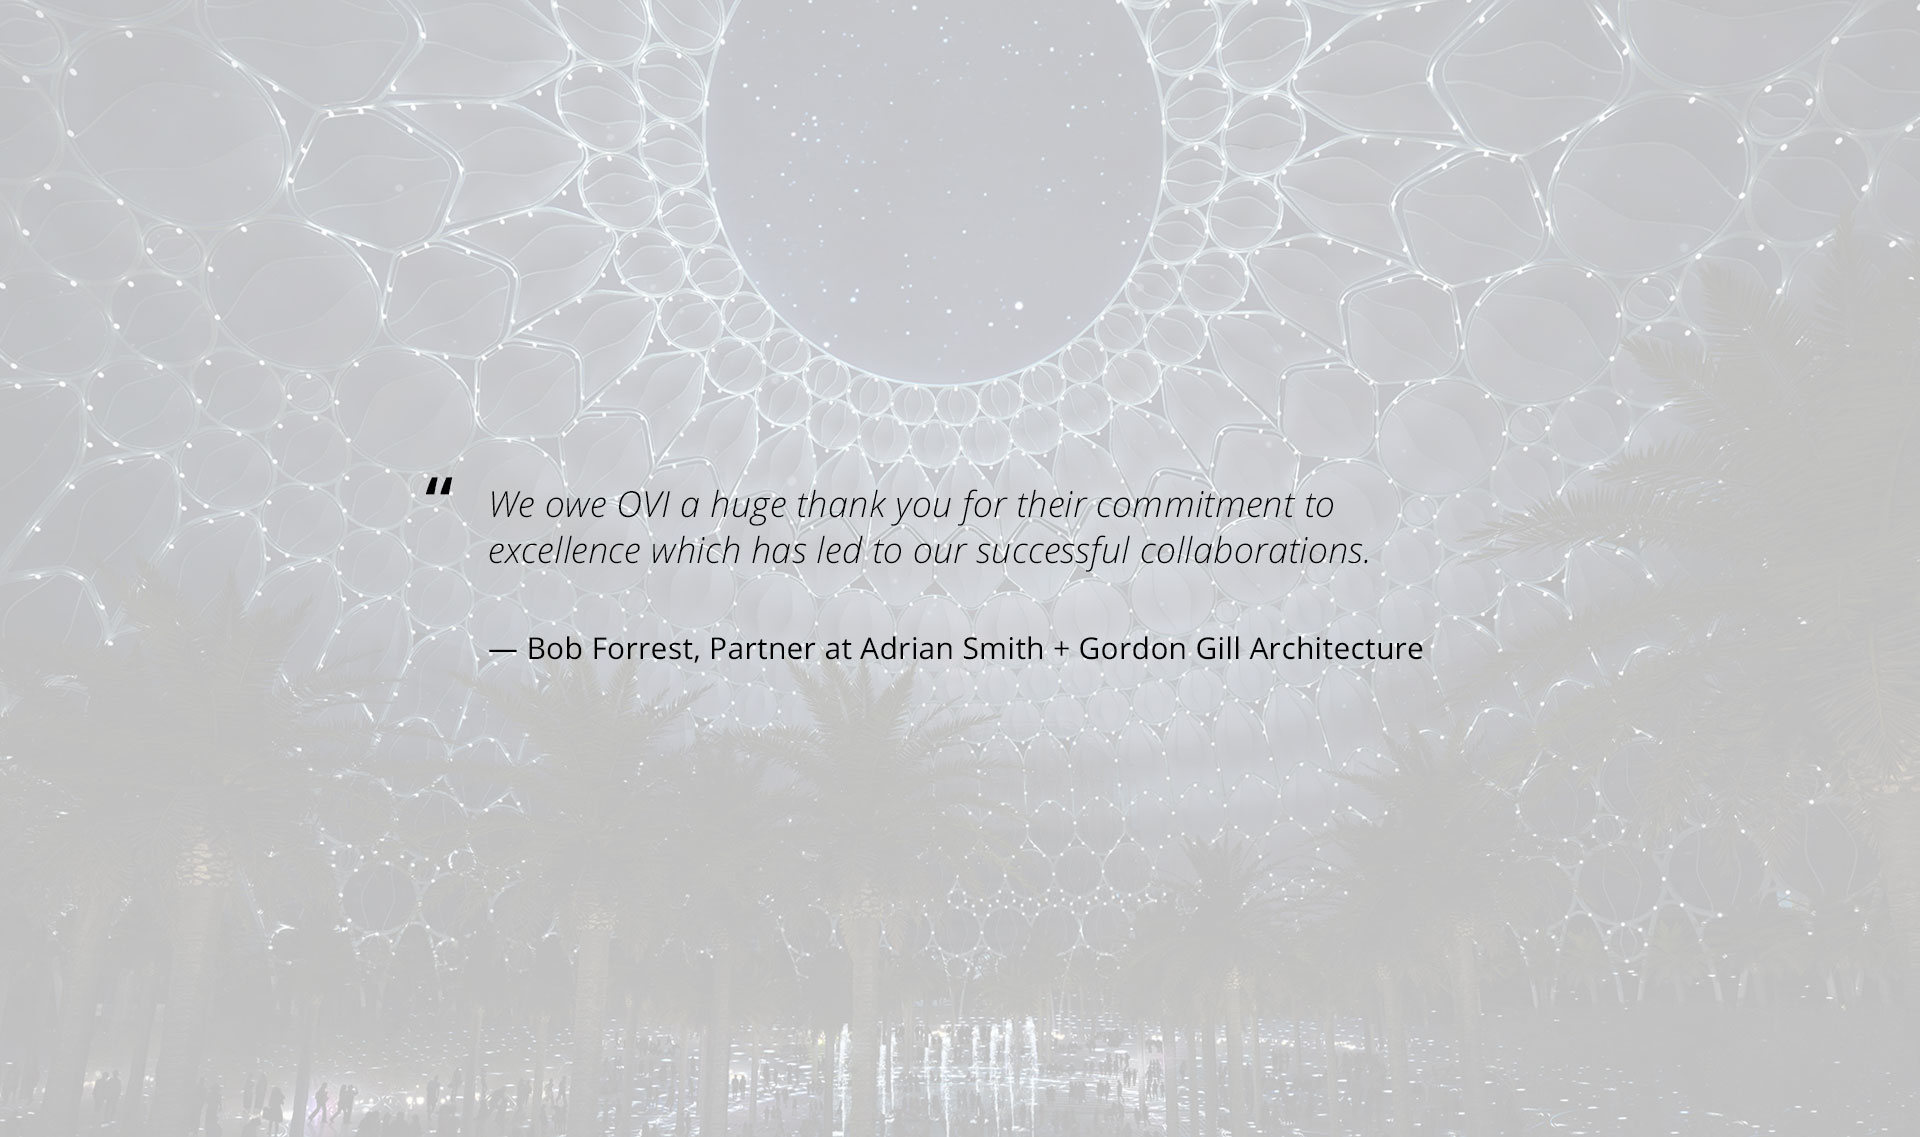 Testimonial about OVI from Bob Forrest, Partner at Adrian Smith + Gordon Gill Architecture